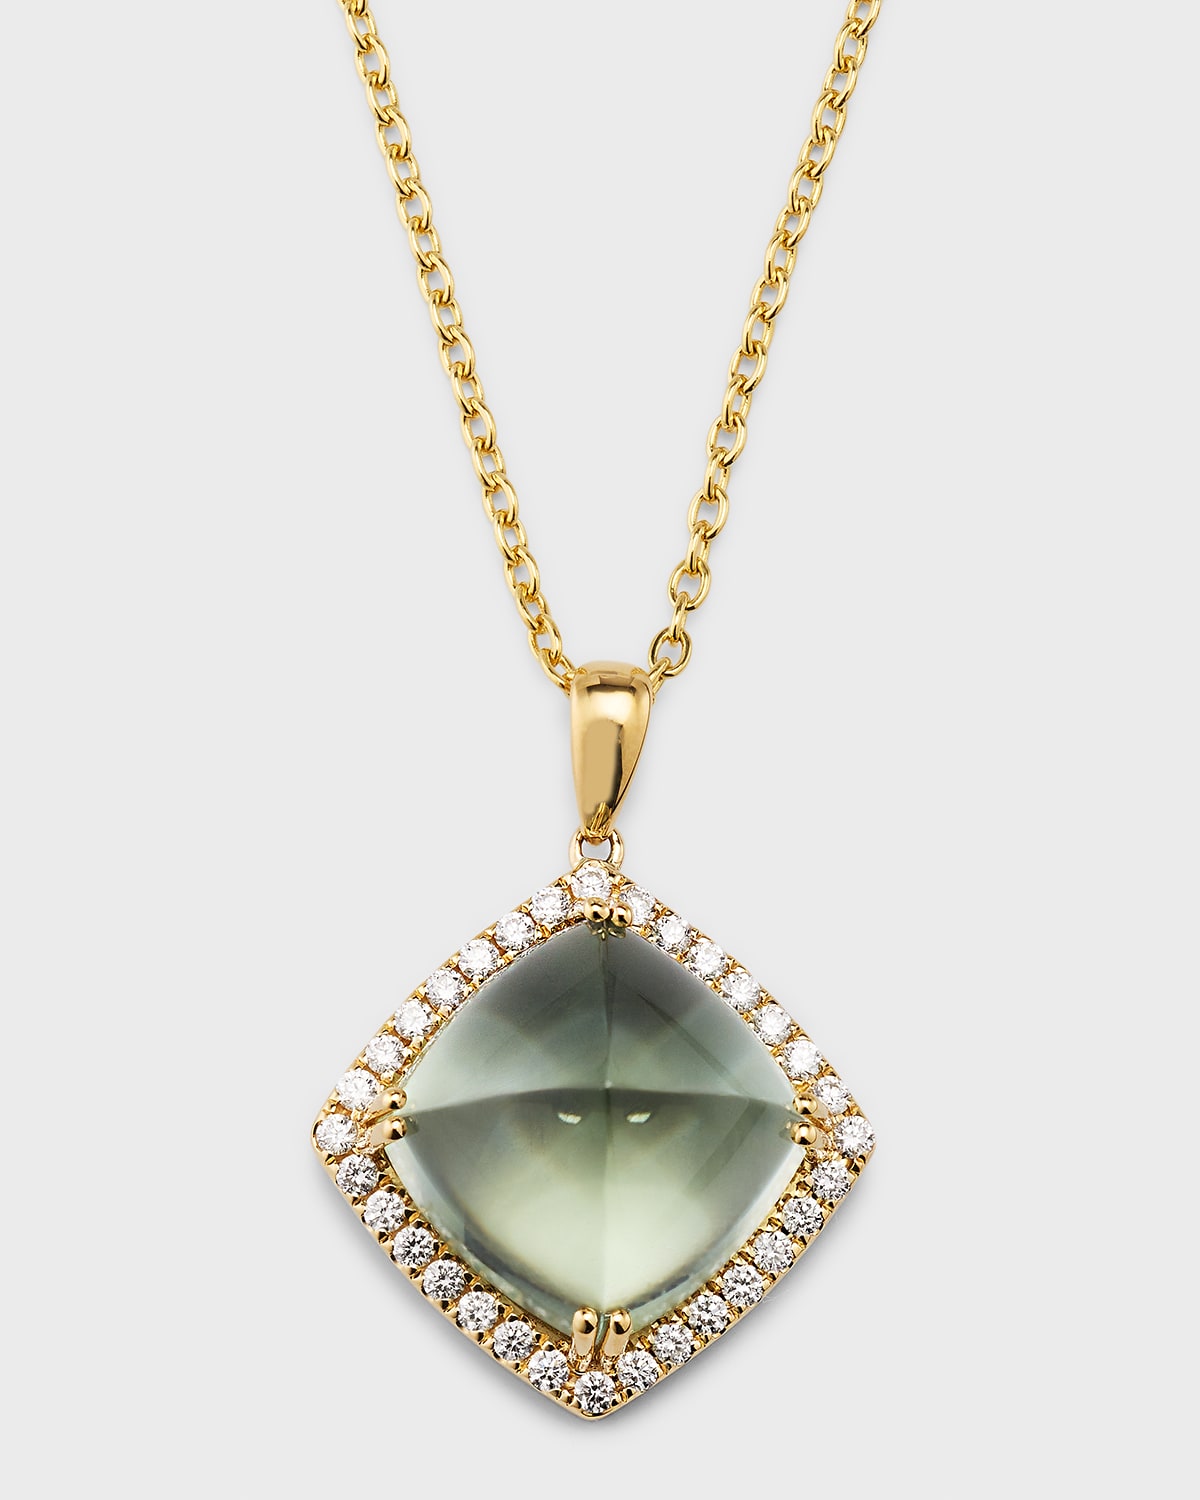 18K Yellow Gold Pendant with Green Amethyst and Diamonds, 8.7tcw